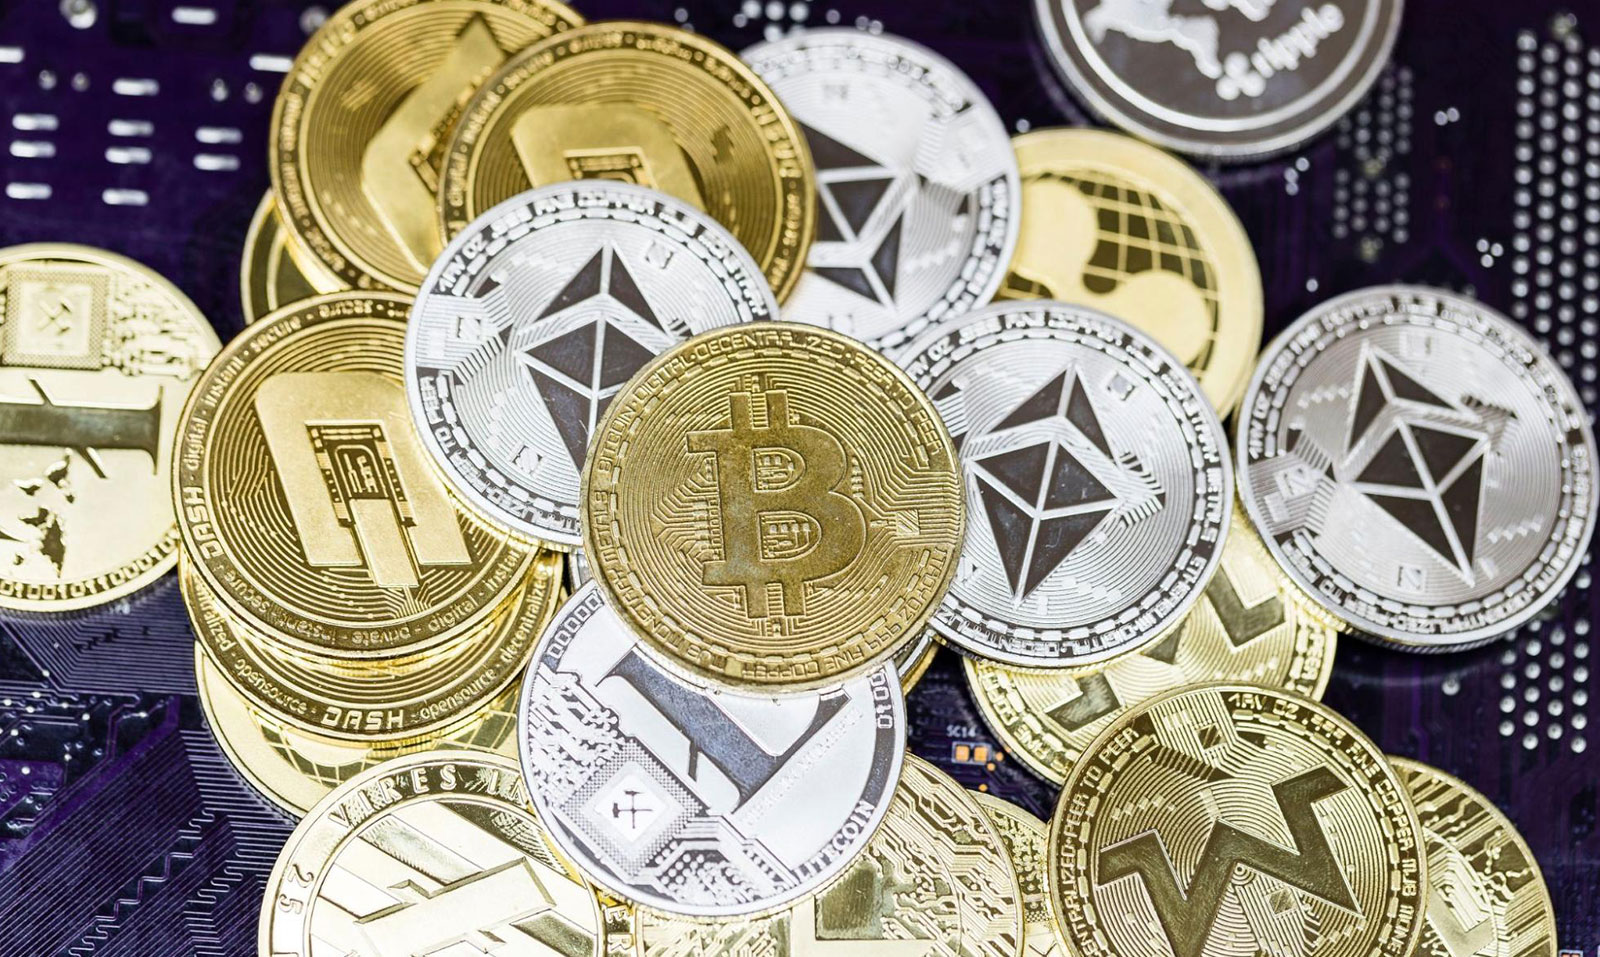 Close-up of cryptocurrencies represented as coins